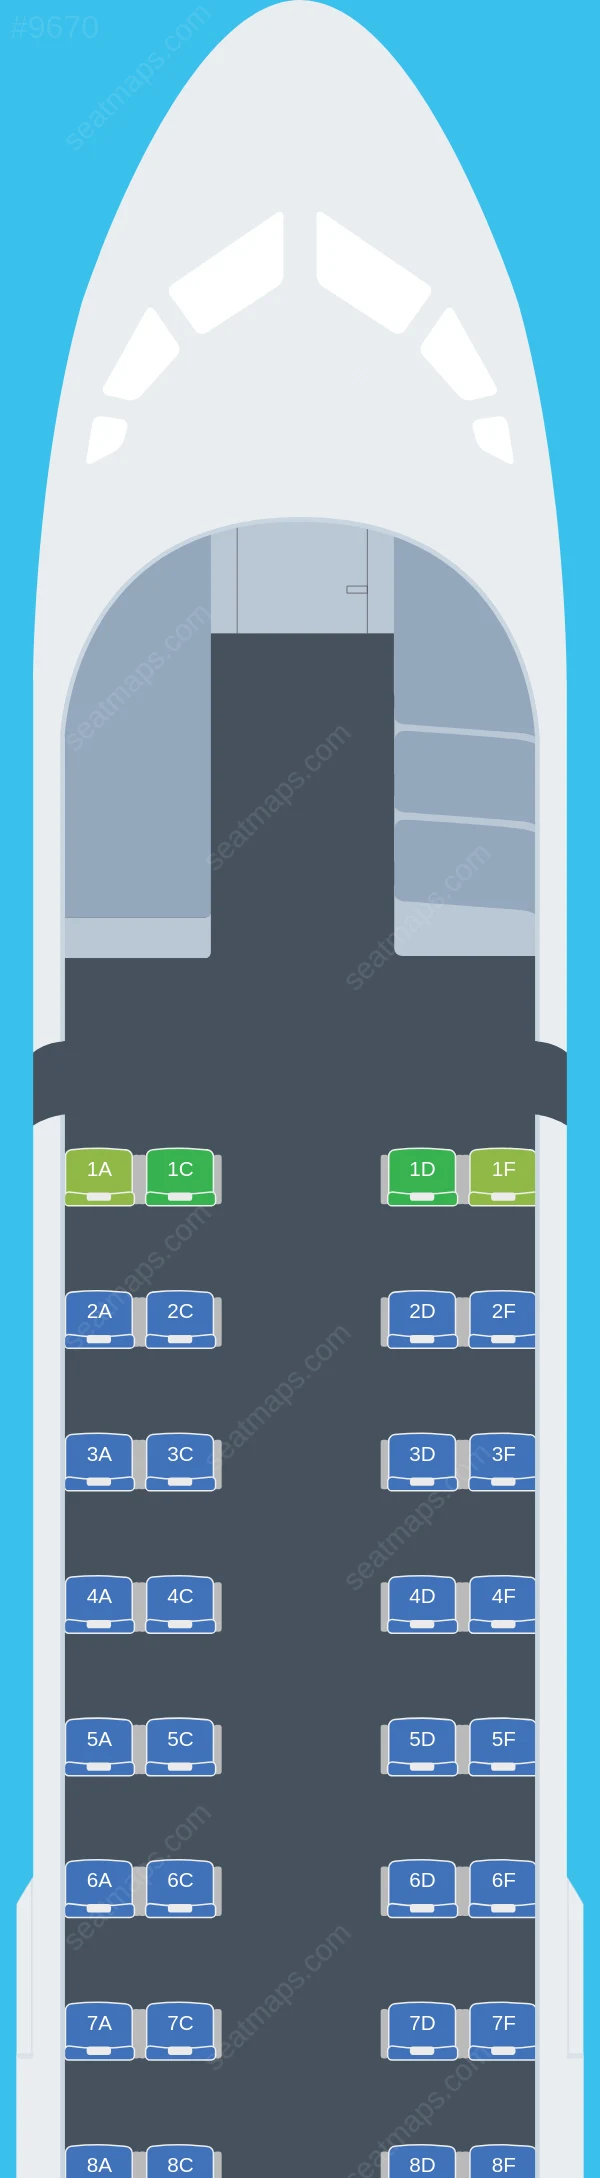 Malaysia Airlines ATR 72-500 seatmap preview